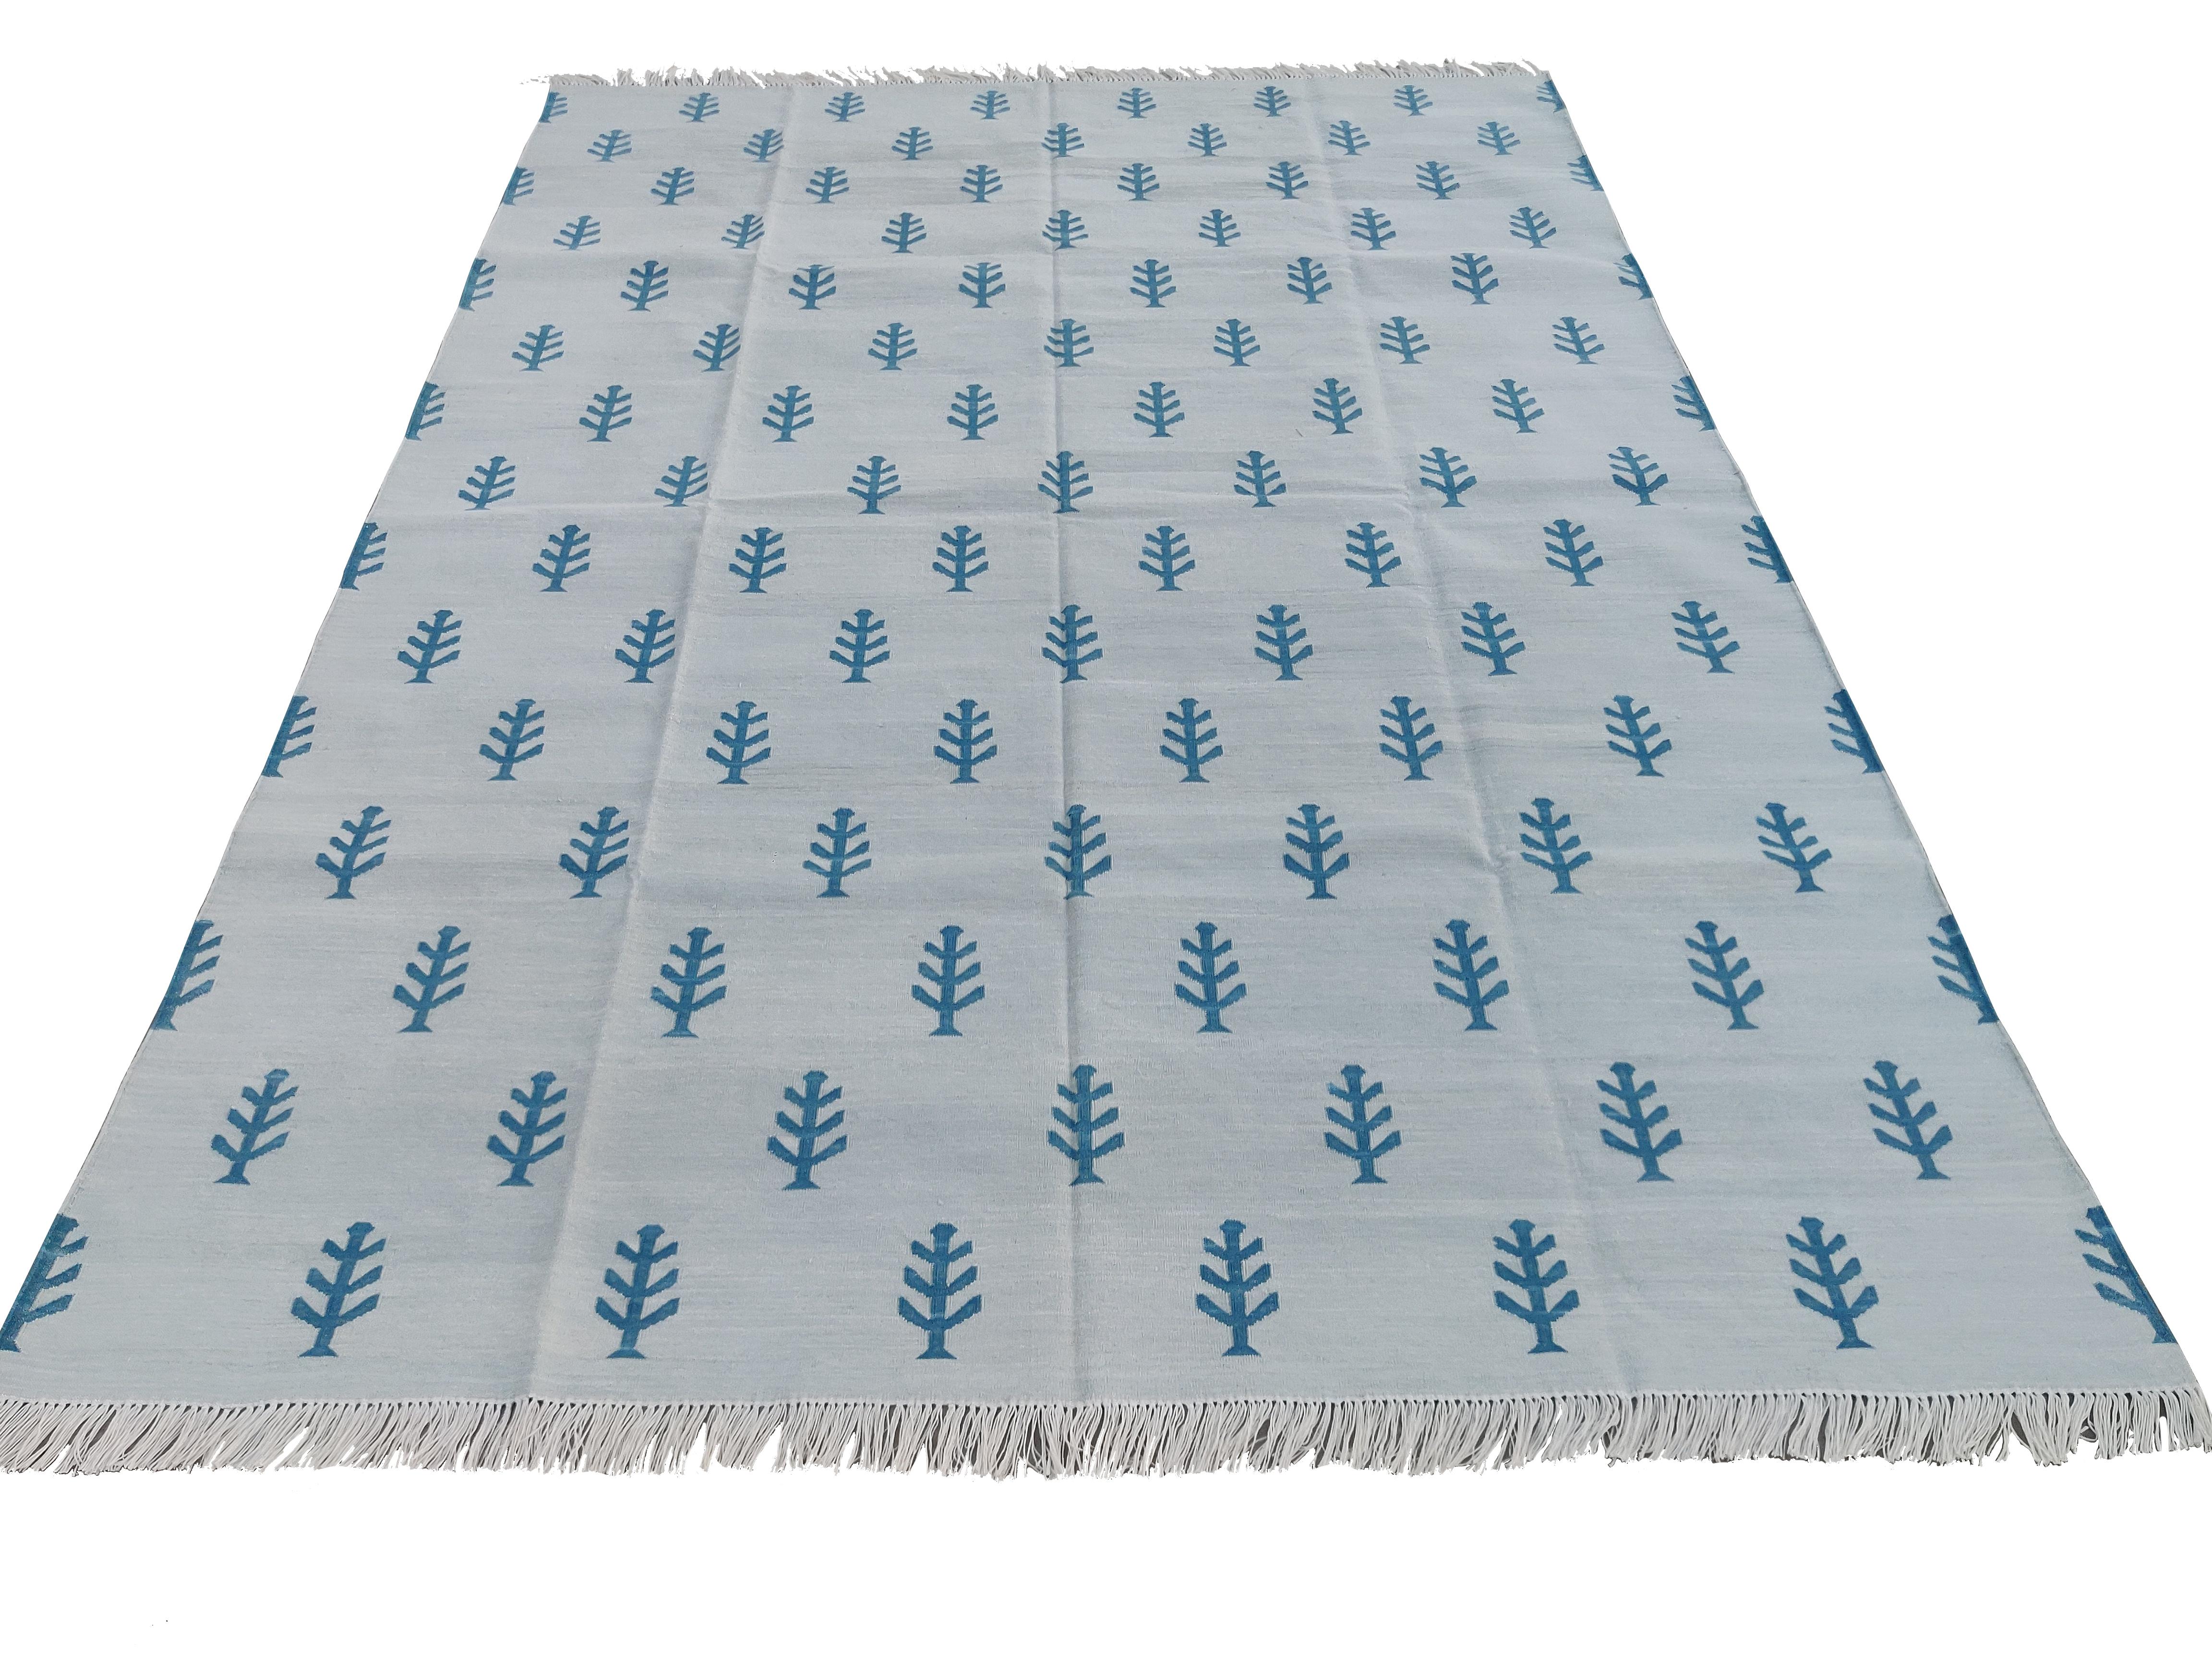 Handmade Cotton Area Flat Weave Rug, Grey & White Tree Patterned Indian Dhurrie In New Condition For Sale In Jaipur, IN